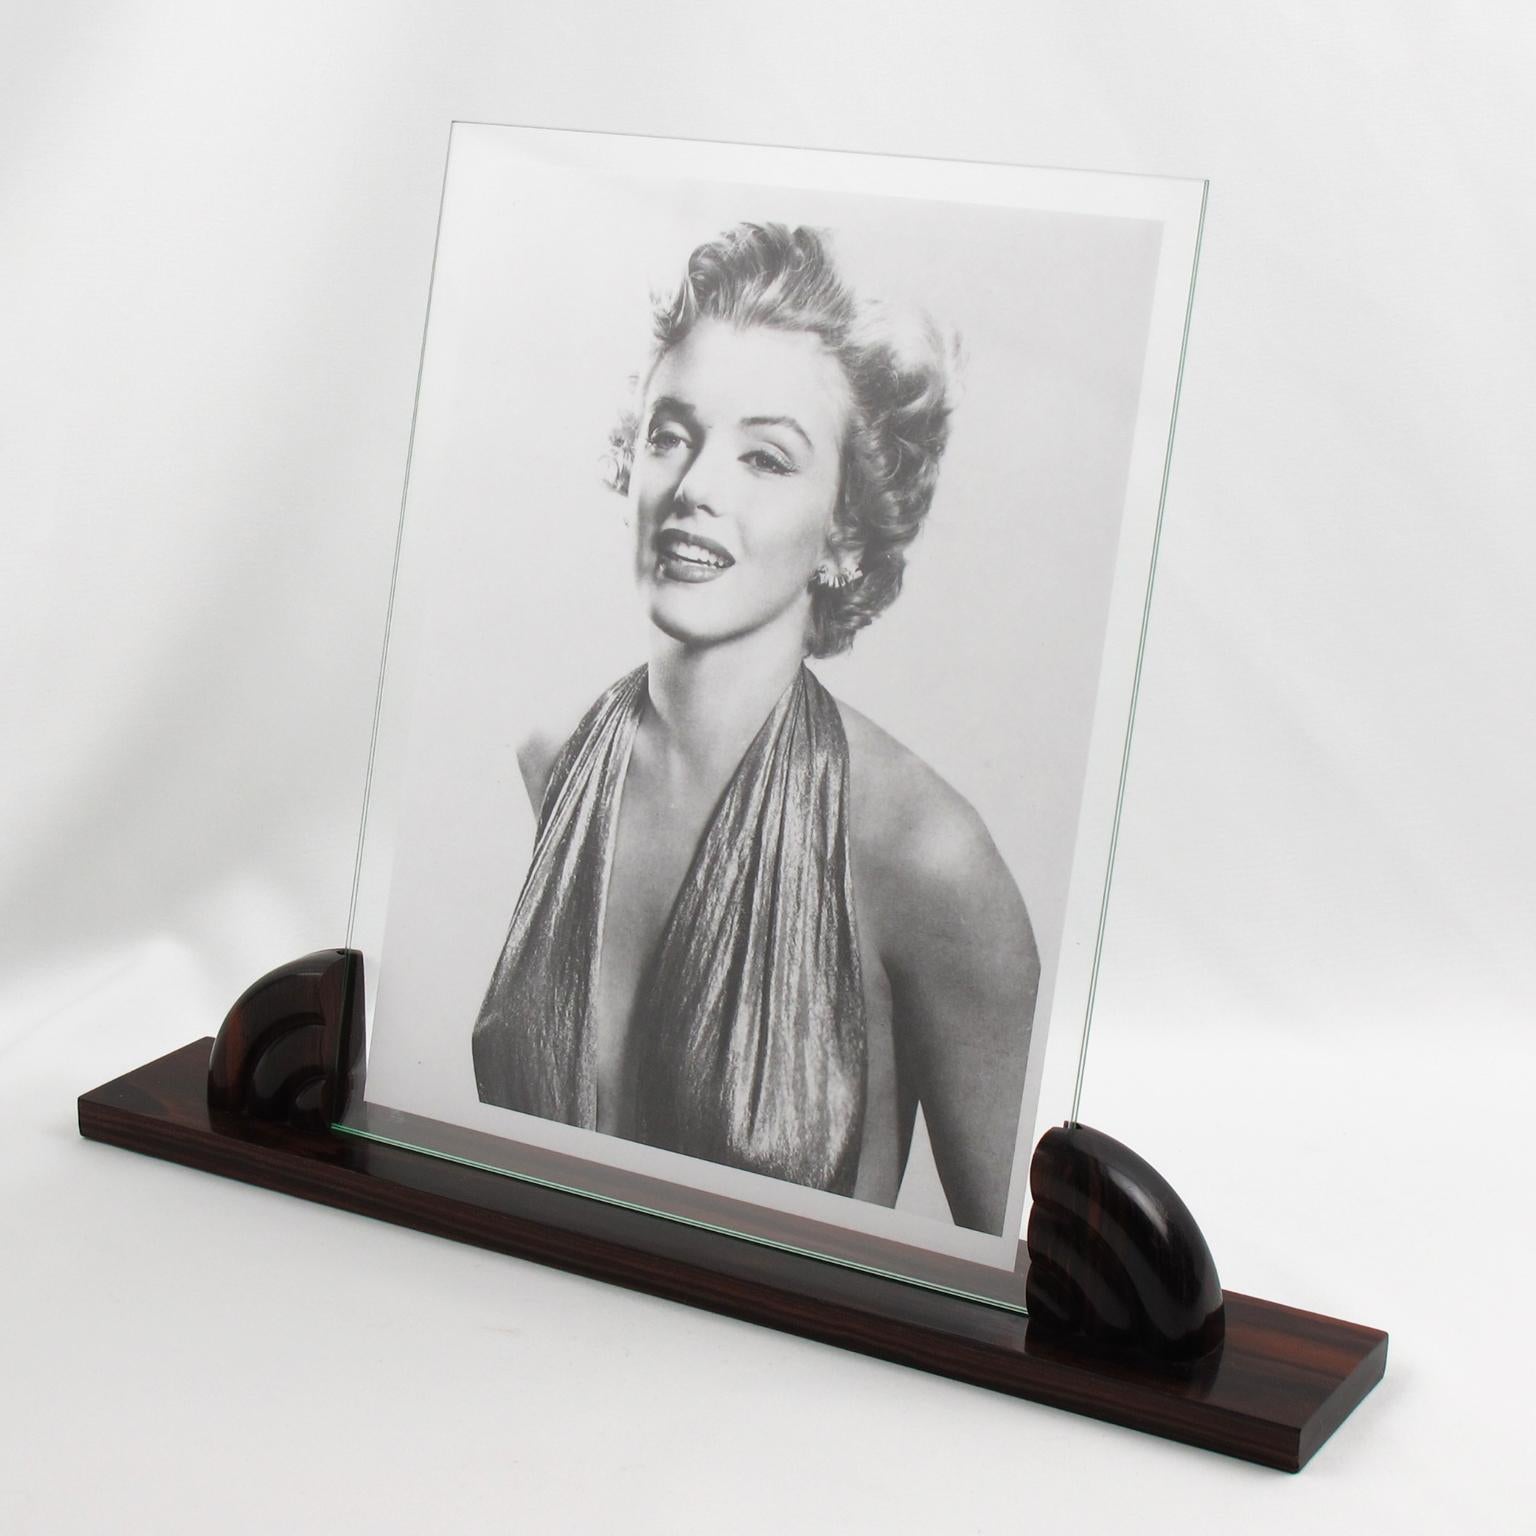 This stunning French Art Deco picture photo frame features a thick hand-rubbed Macassar wood plinth complimented with the same carved wood insert holders. The photo frame is complete with two glass sheets to enclose the photography. There is no